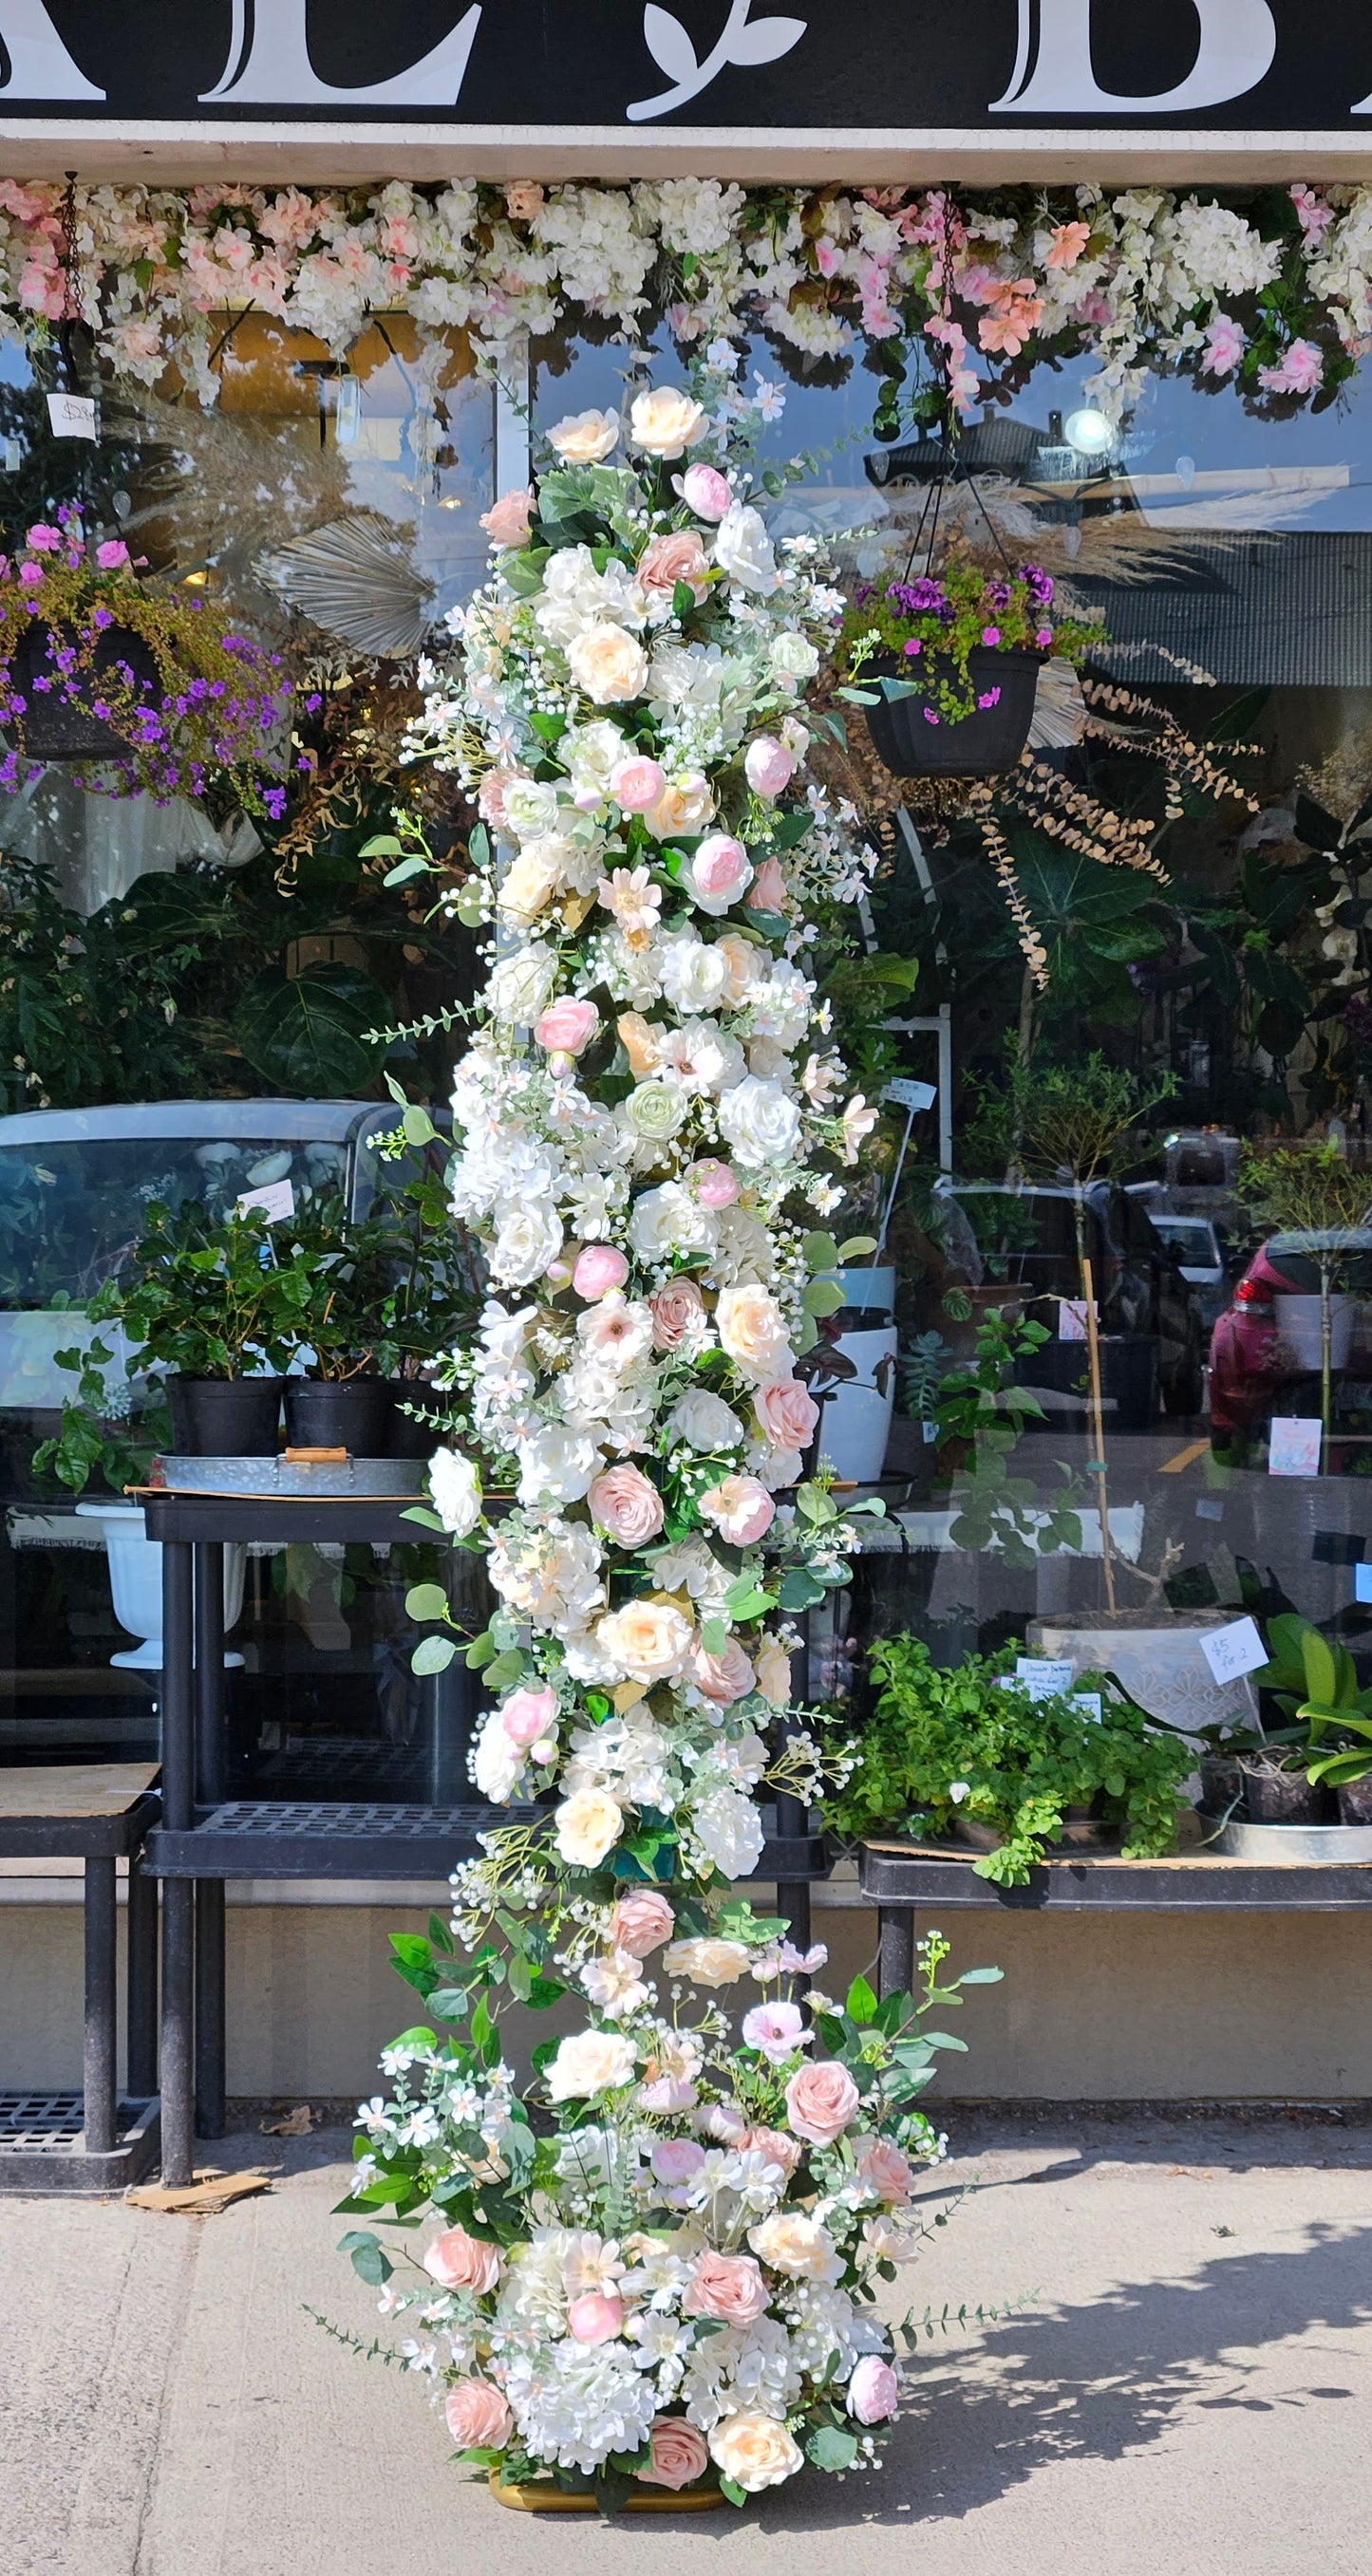 *rental* Deluxe faux flower arch pillar 78'' H x 12''W $800 for 2 days